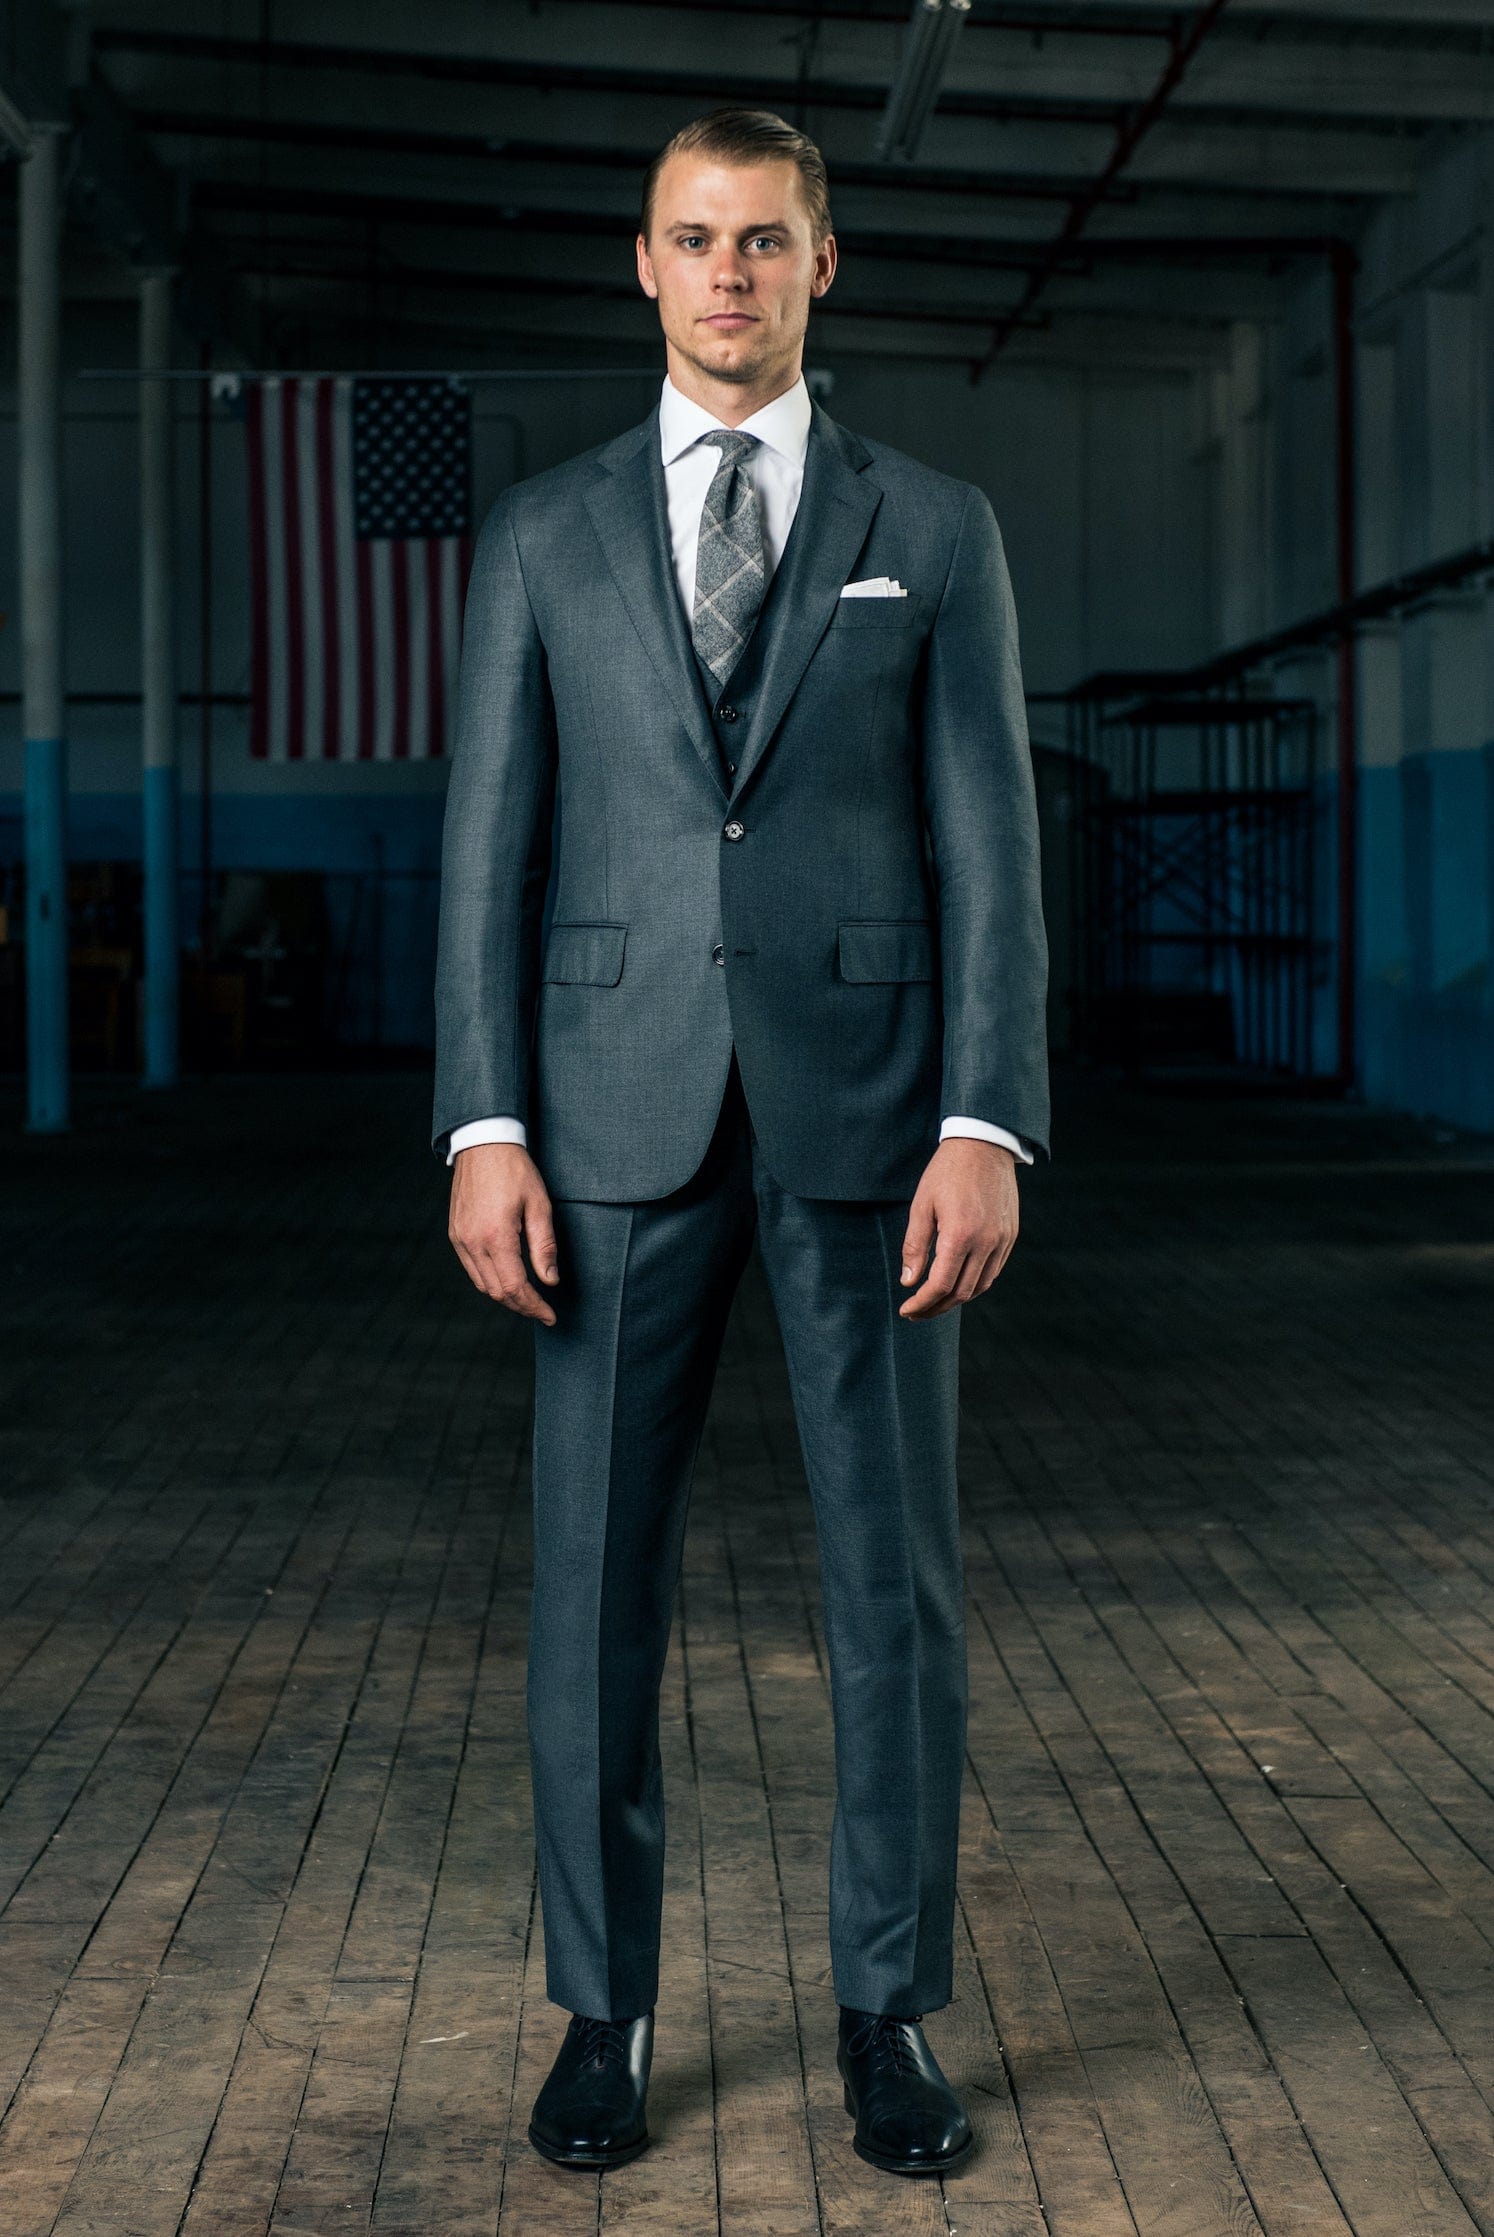 Buy Charcoal Gray Suit Online In India - Etsy India